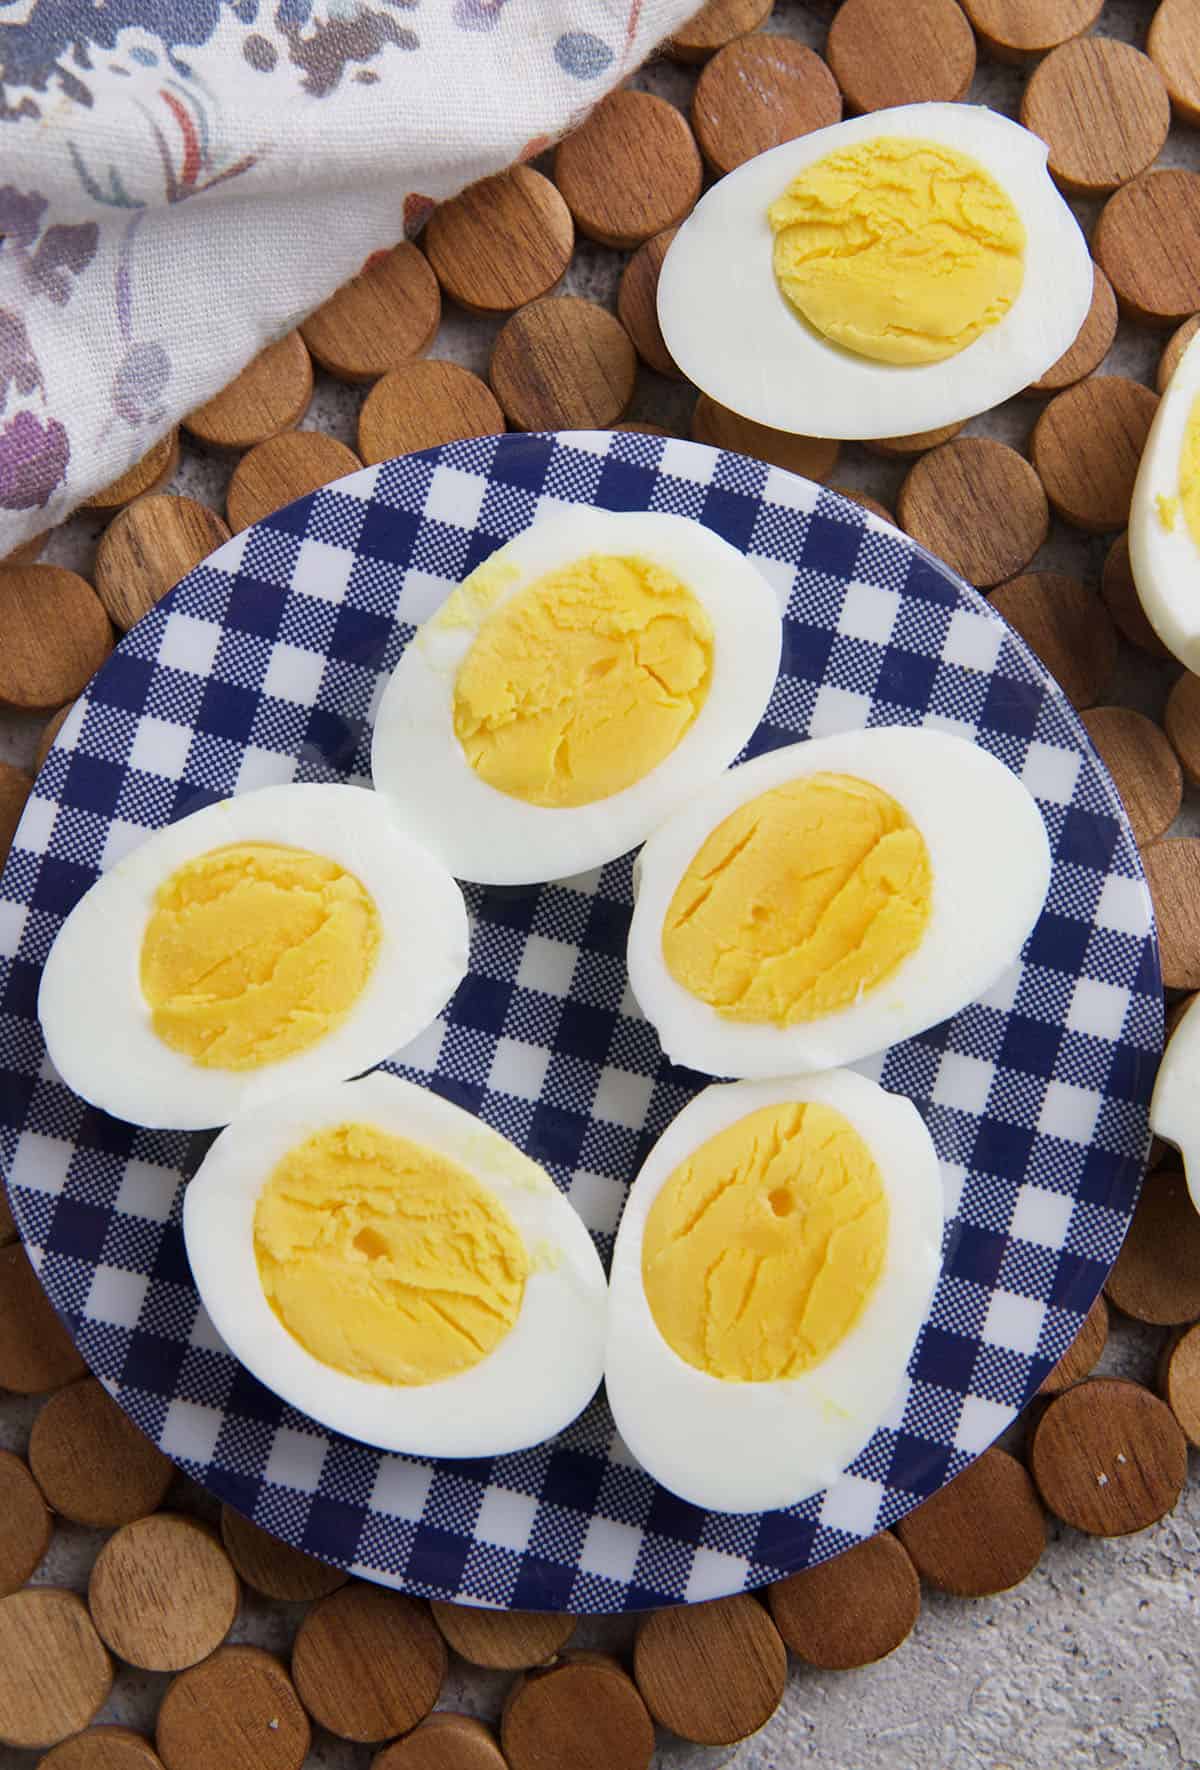 Several sliced hard boiled eggs are on a blue and white plate. 